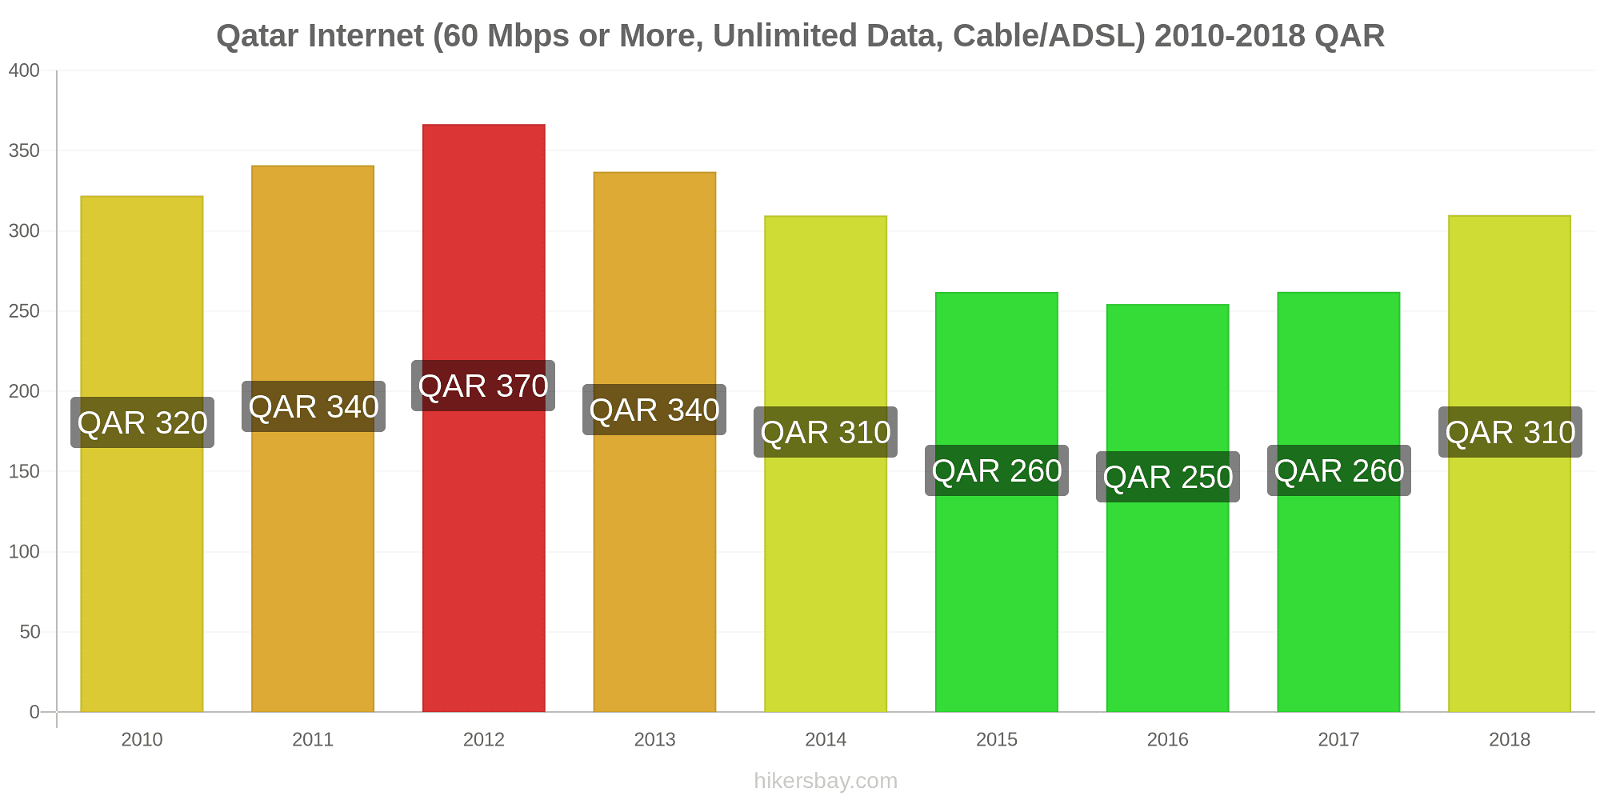 Qatar price changes Internet (60 Mbps or more, unlimited data, cable/ADSL) hikersbay.com